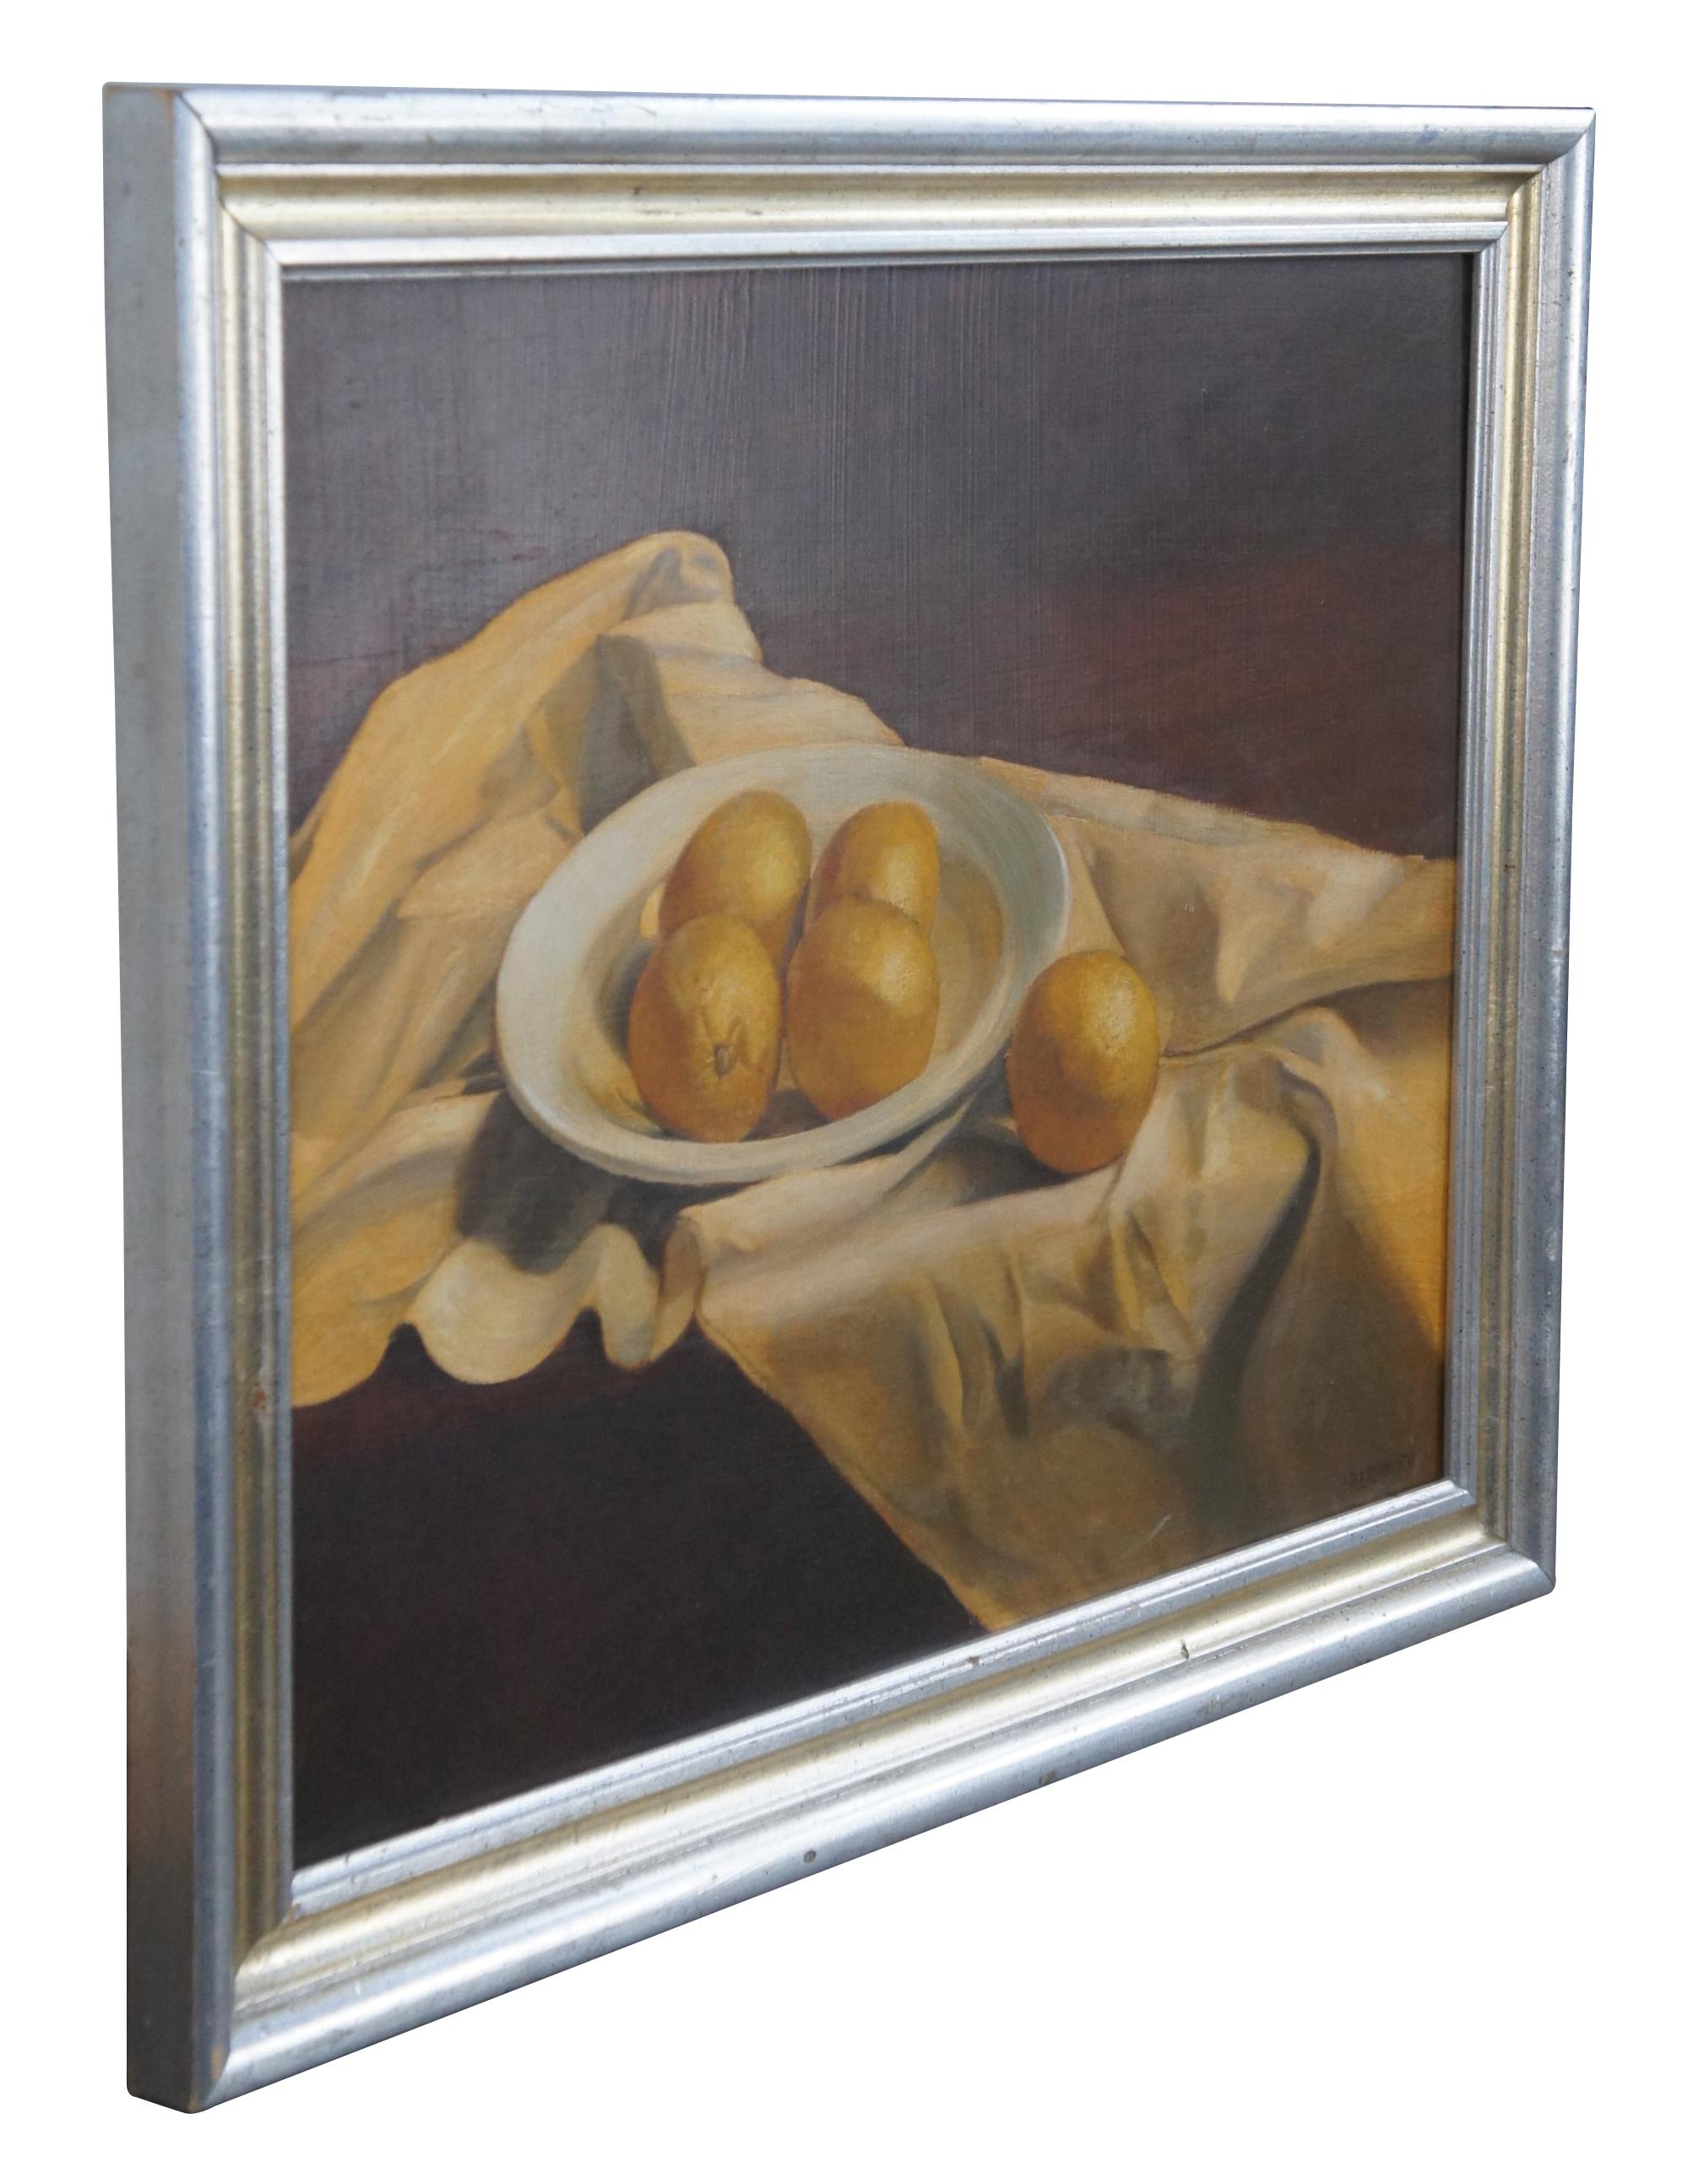 Vintage Ronald Renmark oil painting on canvas featuring a bowl of lemons on a ruffled tablecloth. Signed lower right.

Ronald Eastbourne Renmark (American 20th-21st Century) is a romantic realist painter from Richmond Virginia. Born in 1938